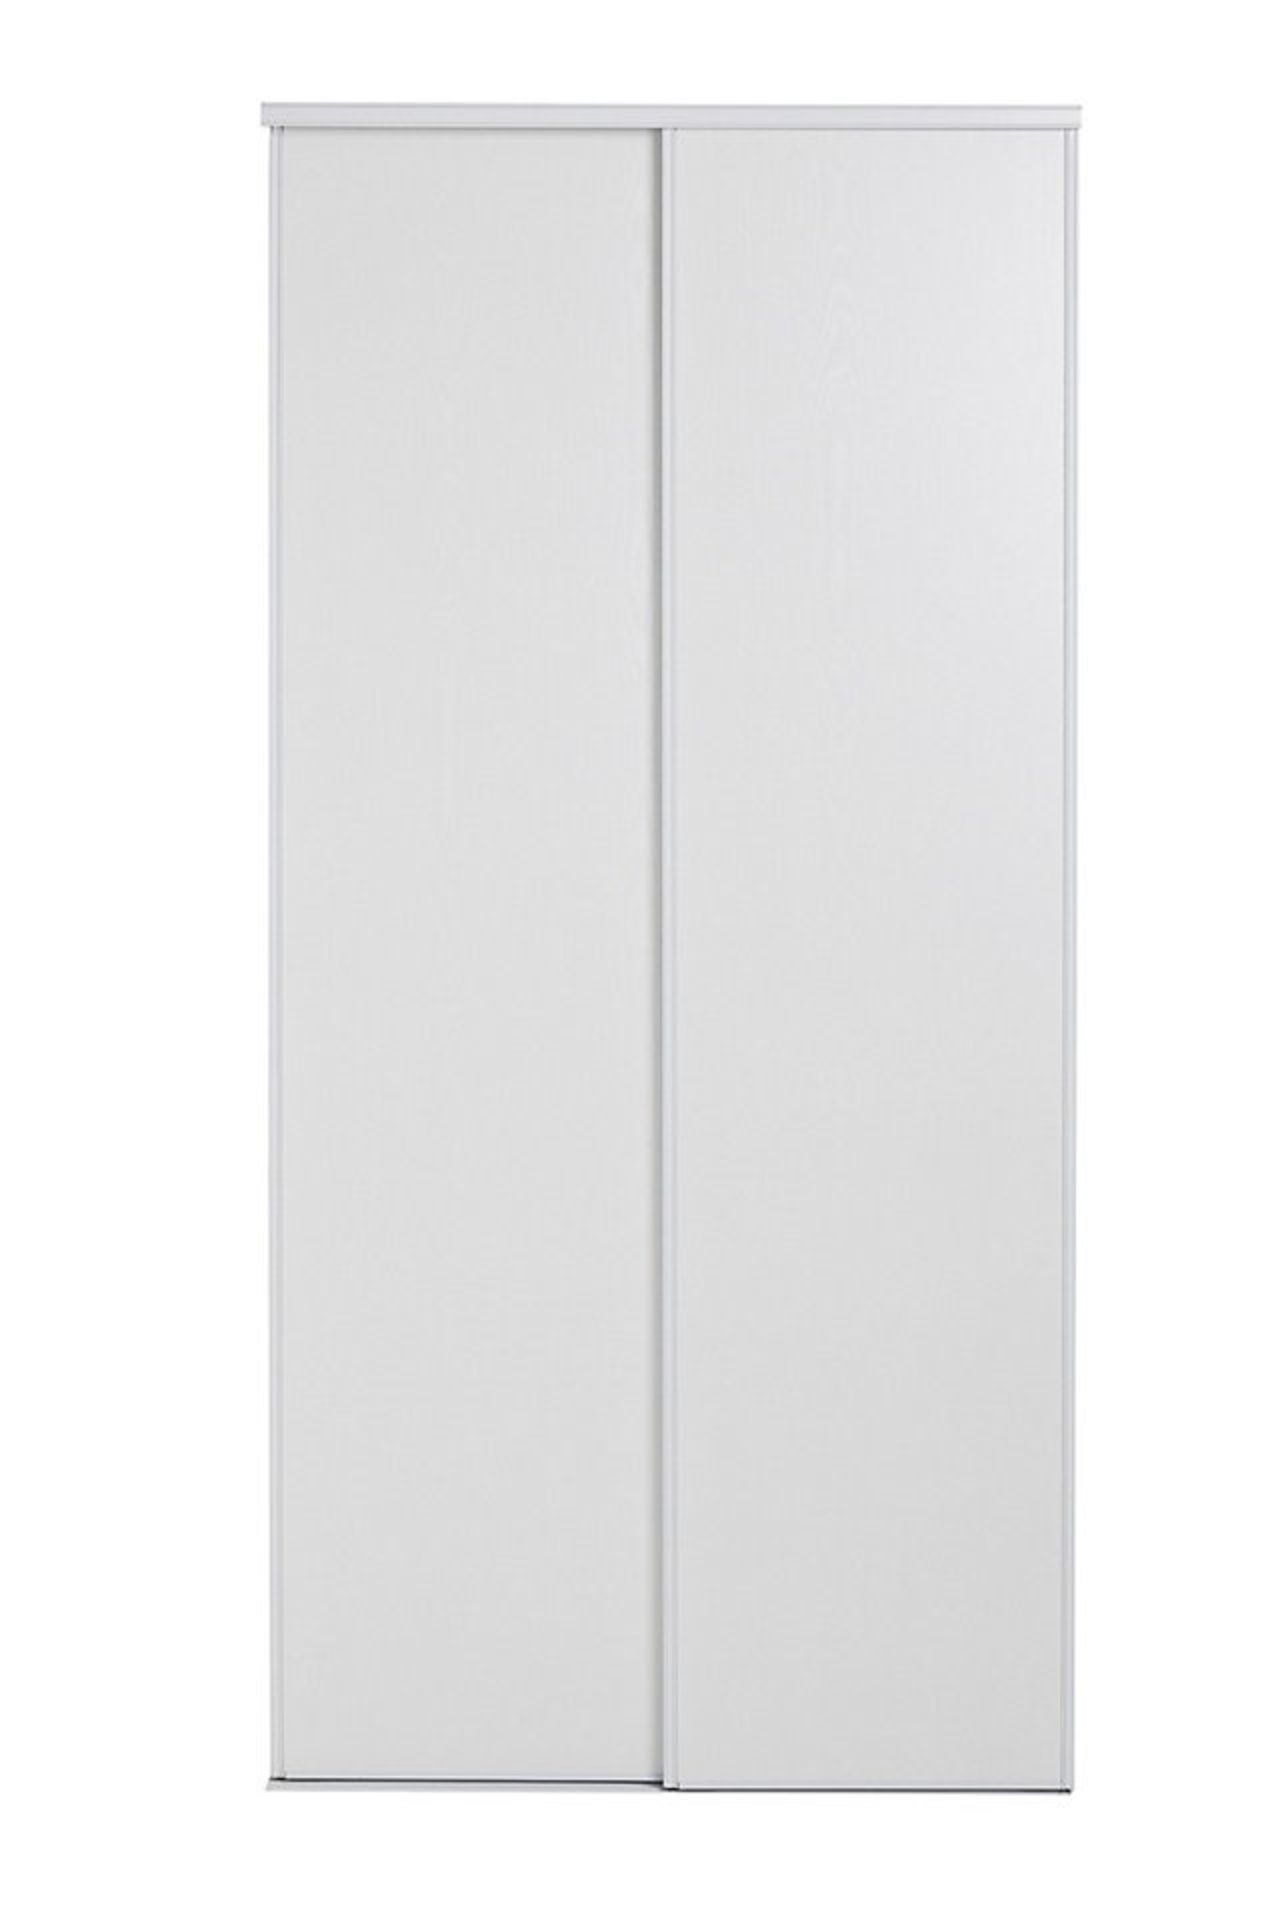 1 x BLIZZ Pack of 2 Sliding Wardrobe Doors In White Decorative Panel With White Lacquered Steel Trac - Bild 2 aus 4